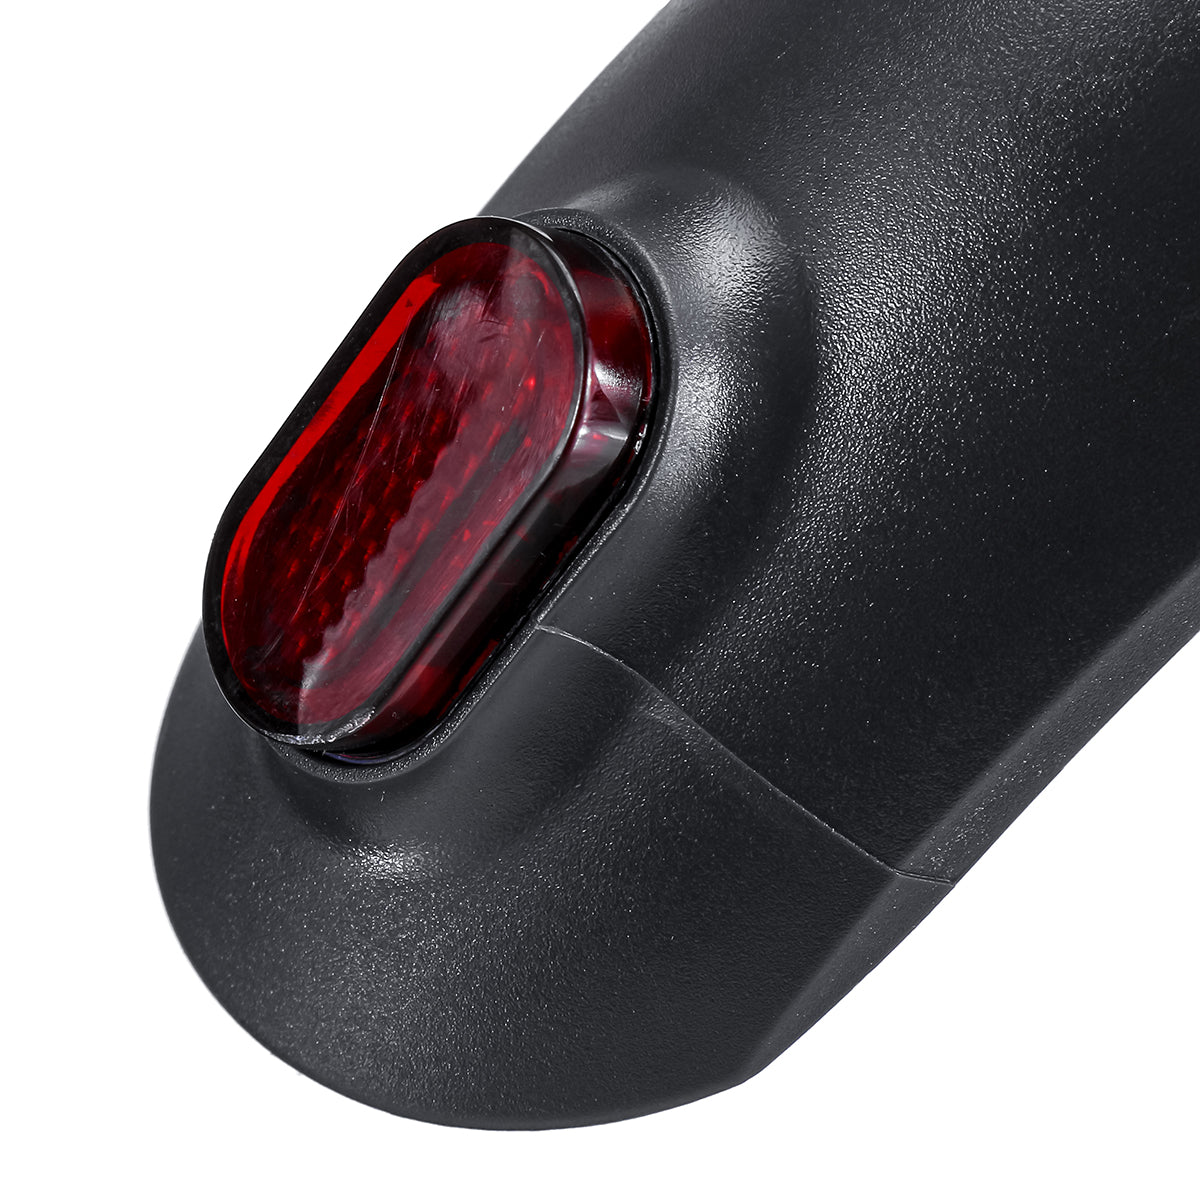 Mud Fender Repair Spare Parts with Taillight for M365 Electric Scooter Replacement - Auto GoShop